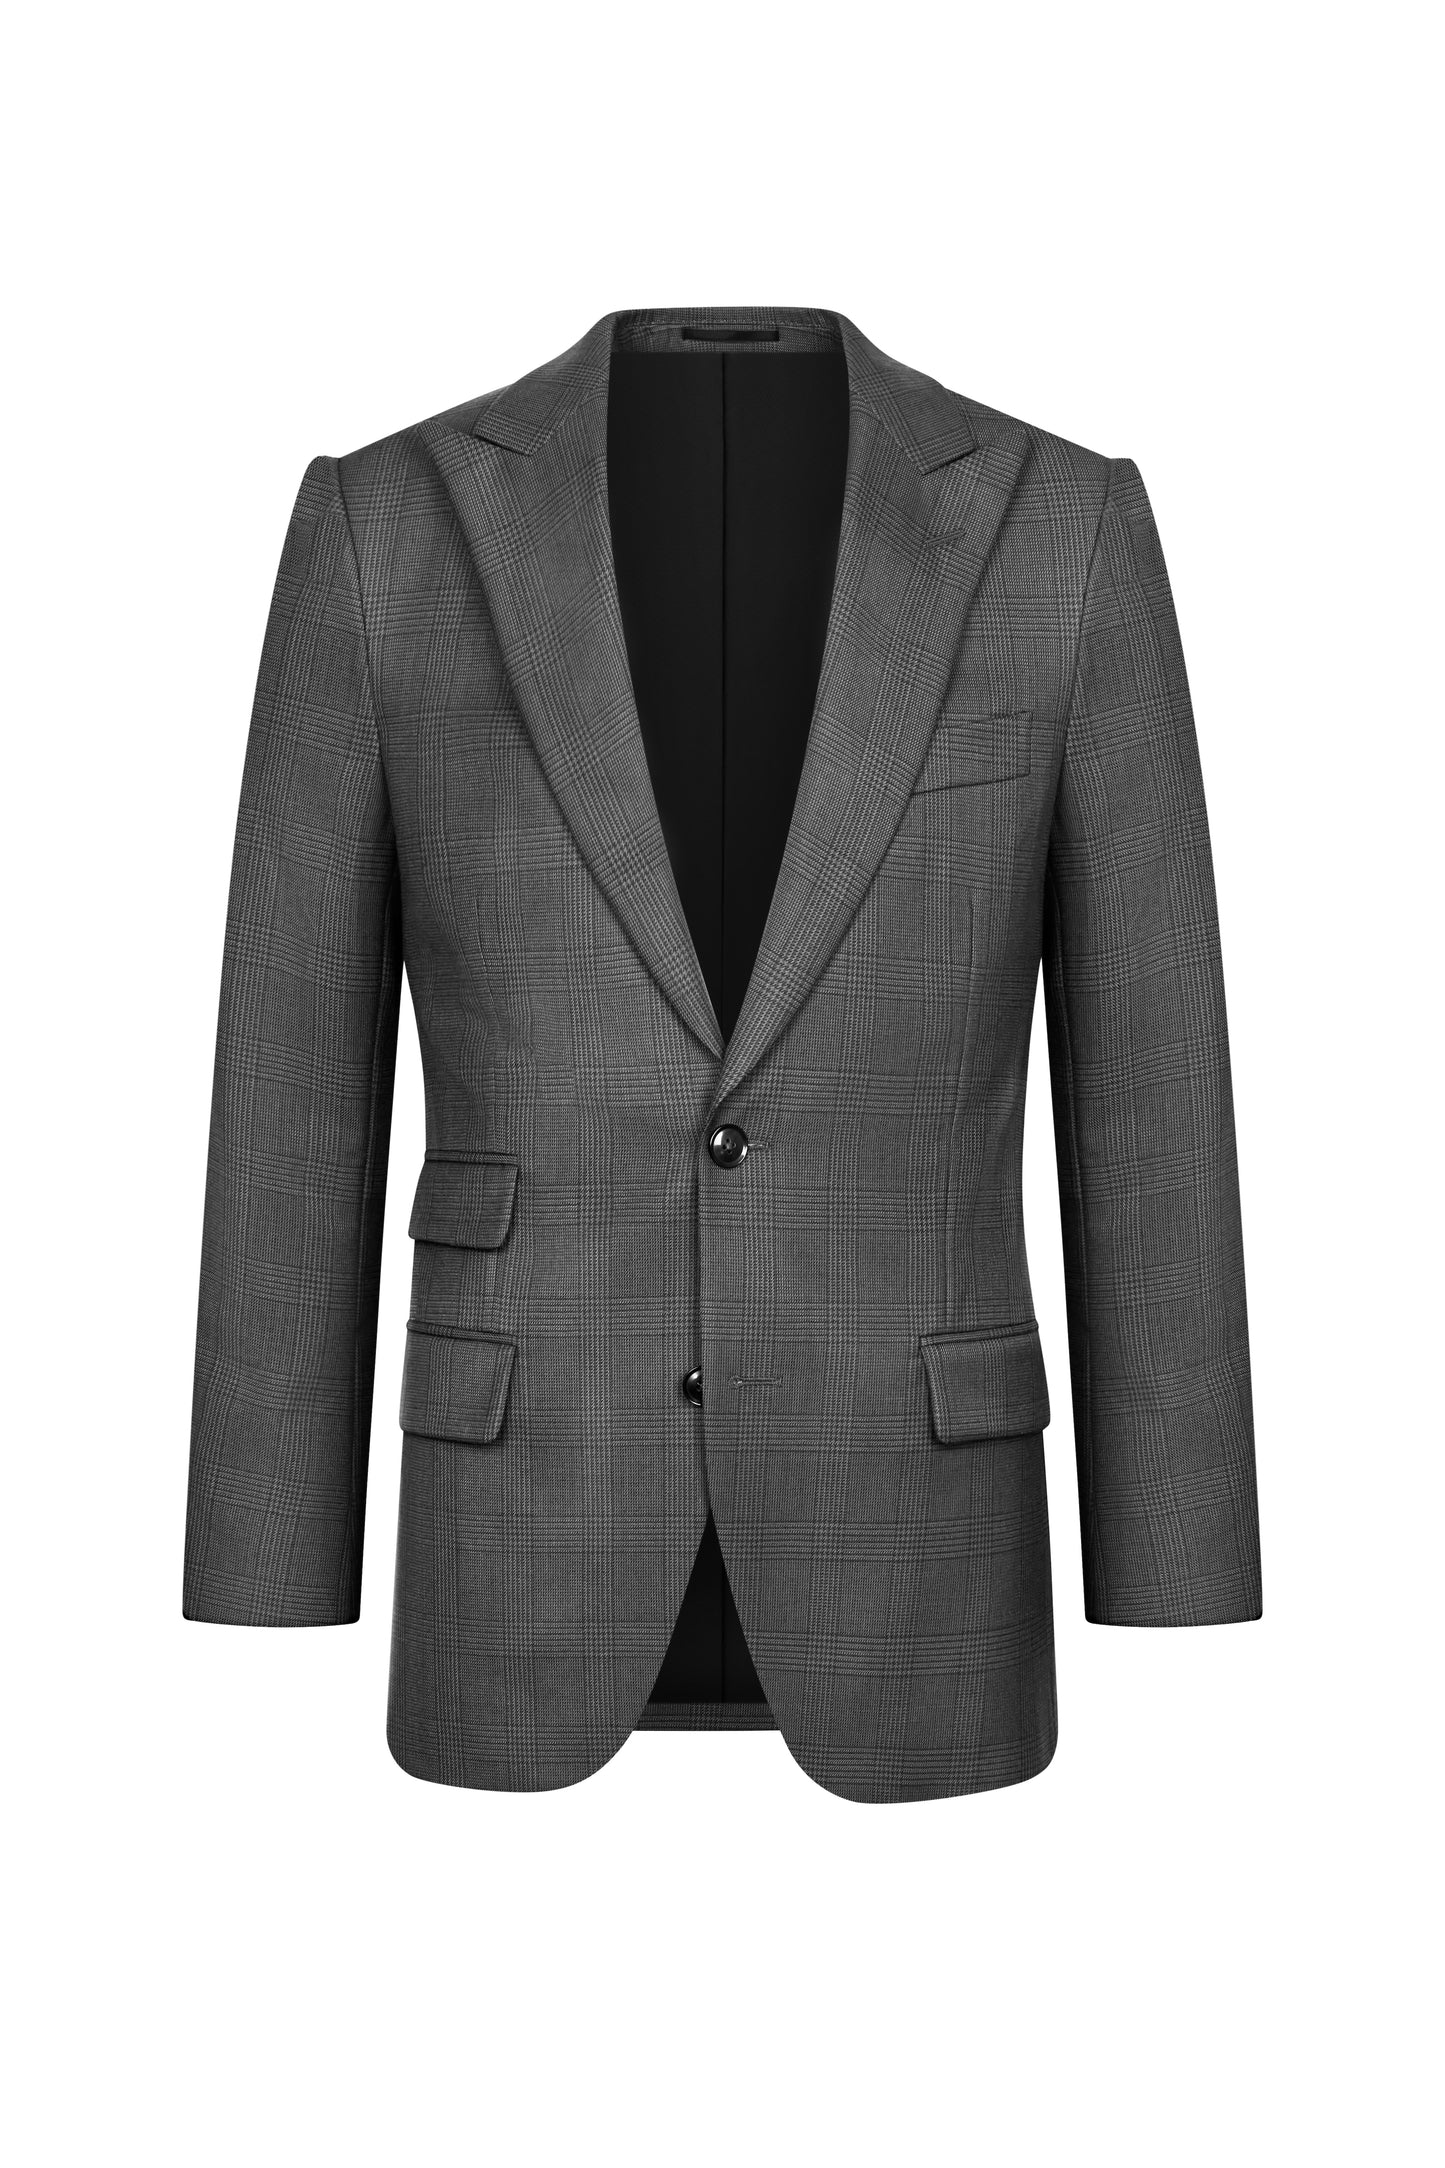 Holland & Sherry Prince of Wales Custom Suit